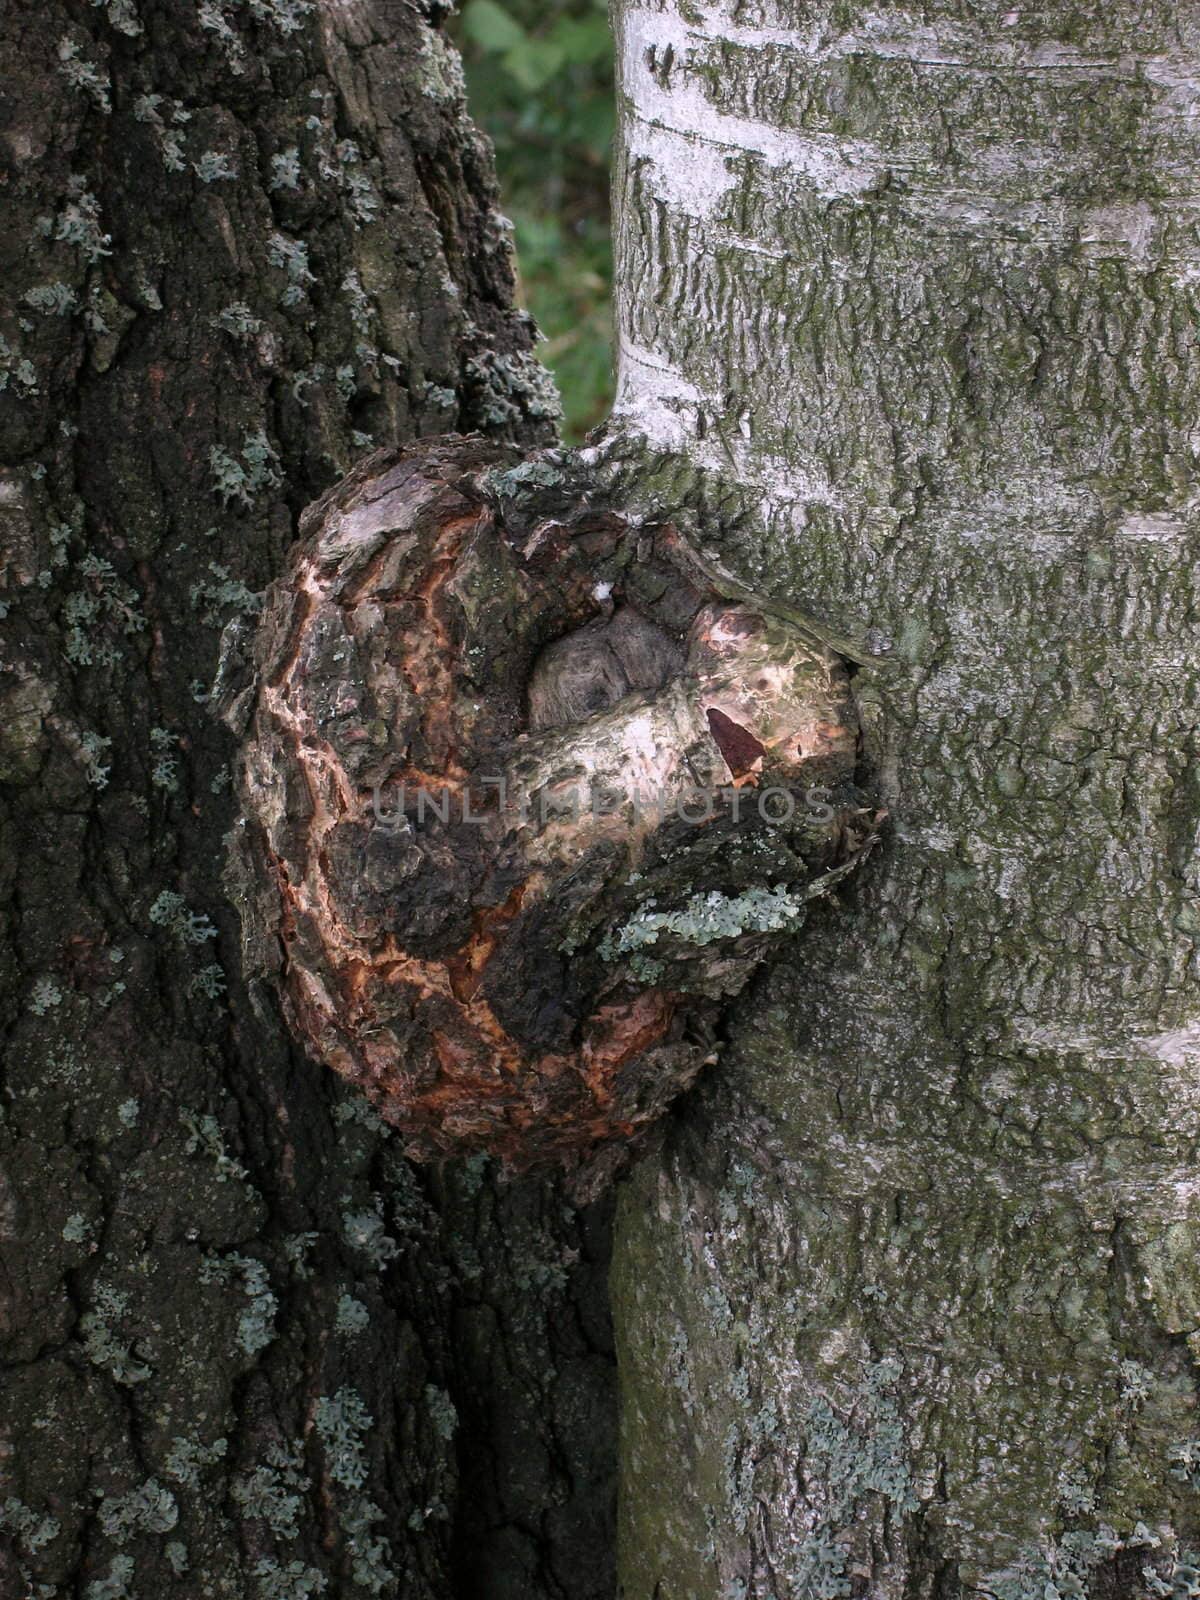 Excrescence on the birch tree trunk